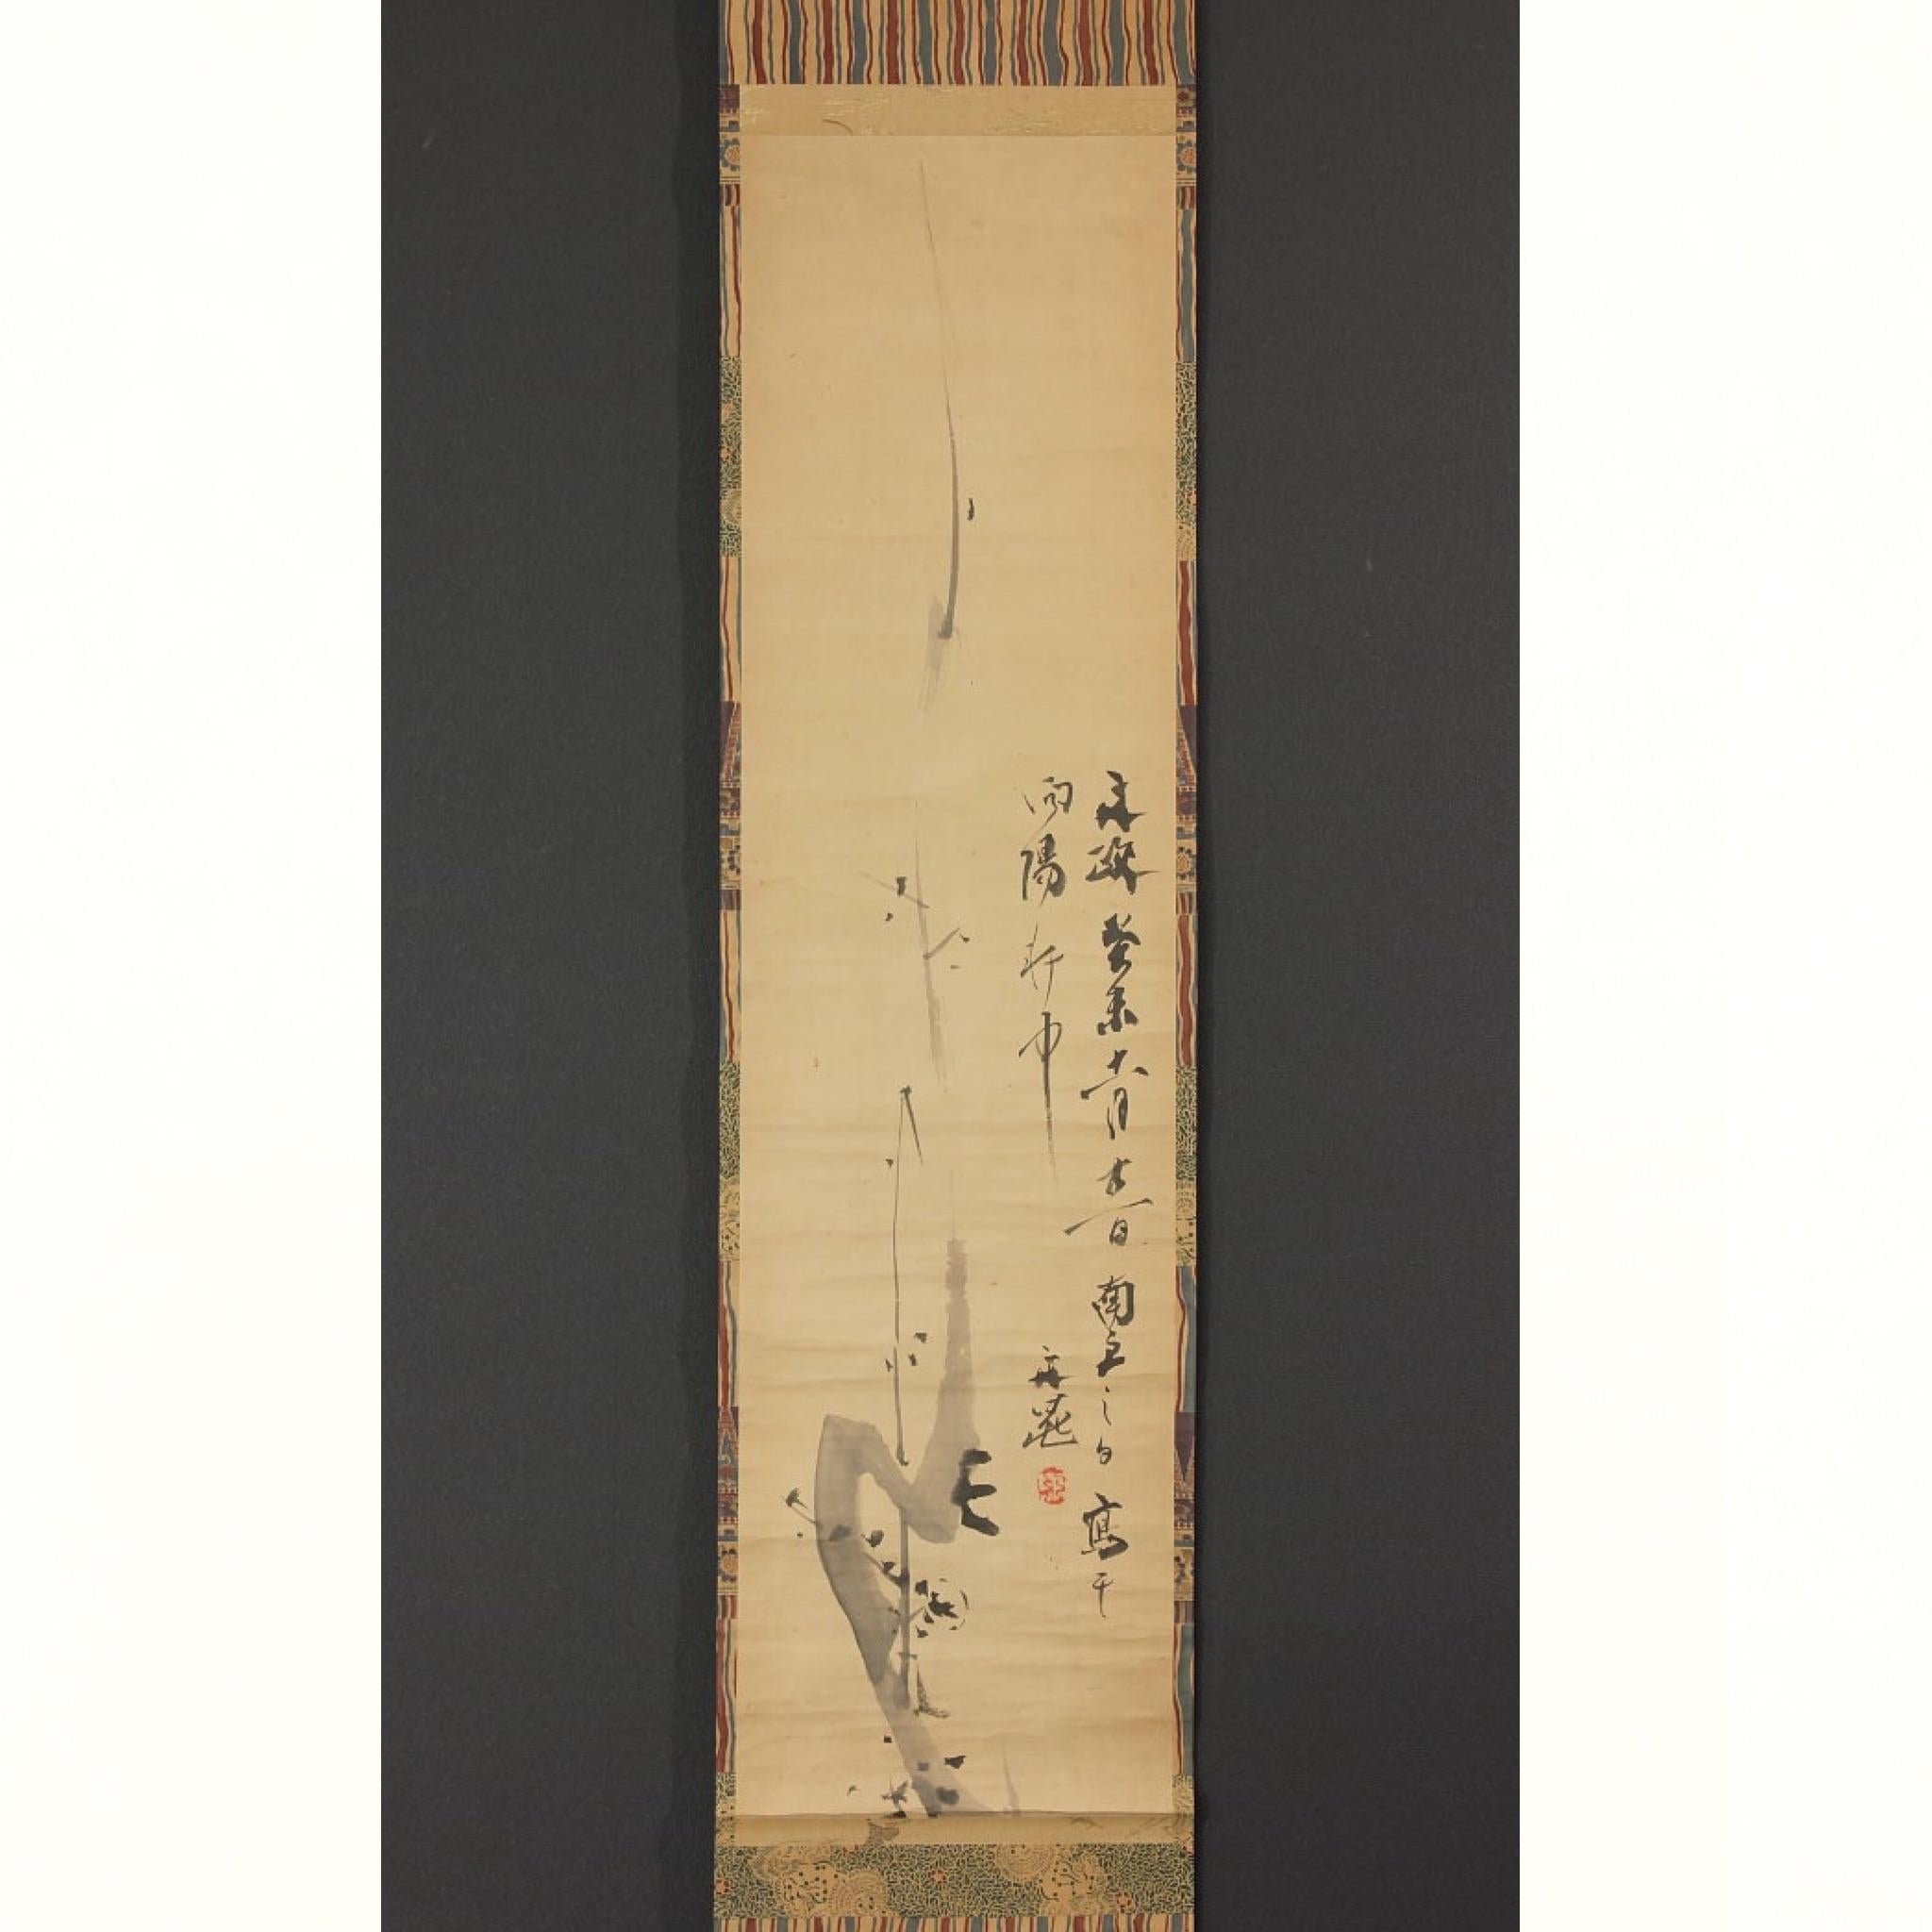 Japanese ink on paper painting of Plum Blossoms and Poem, scroll mounting, signature  & single seal: Tani Buncho (1763 - 1840). A famous and prolific literati (bunjin) painter and poet, who focused largely on Chinese inspired landscapes. He spent